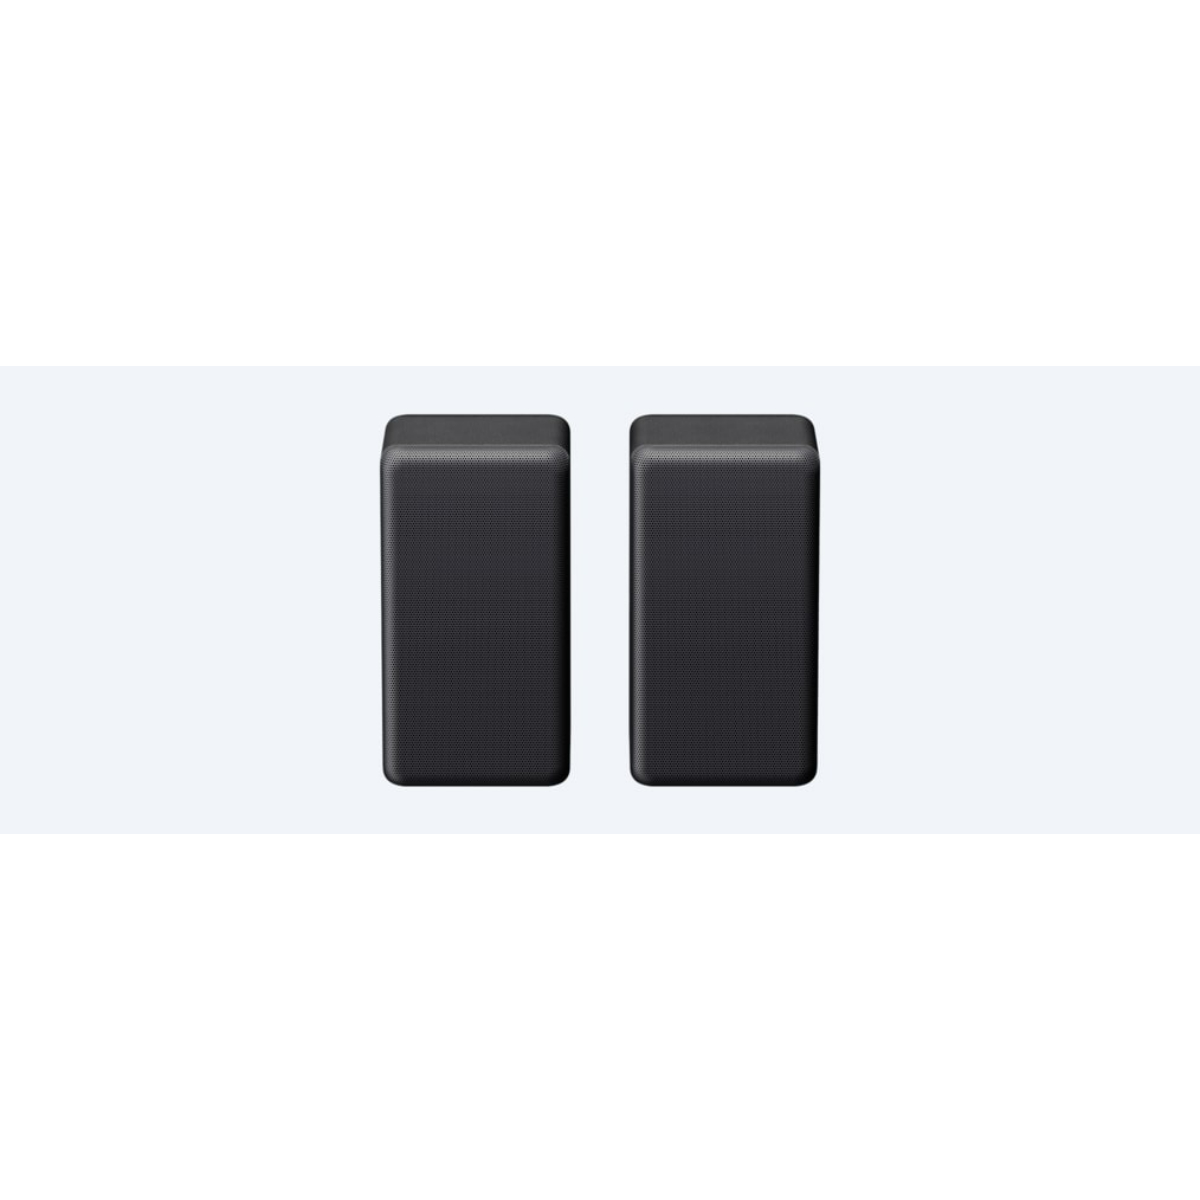 Sony SA-RS3S TOTAL 100W ADDITIONAL WIRELESS REAR SPEAKERS